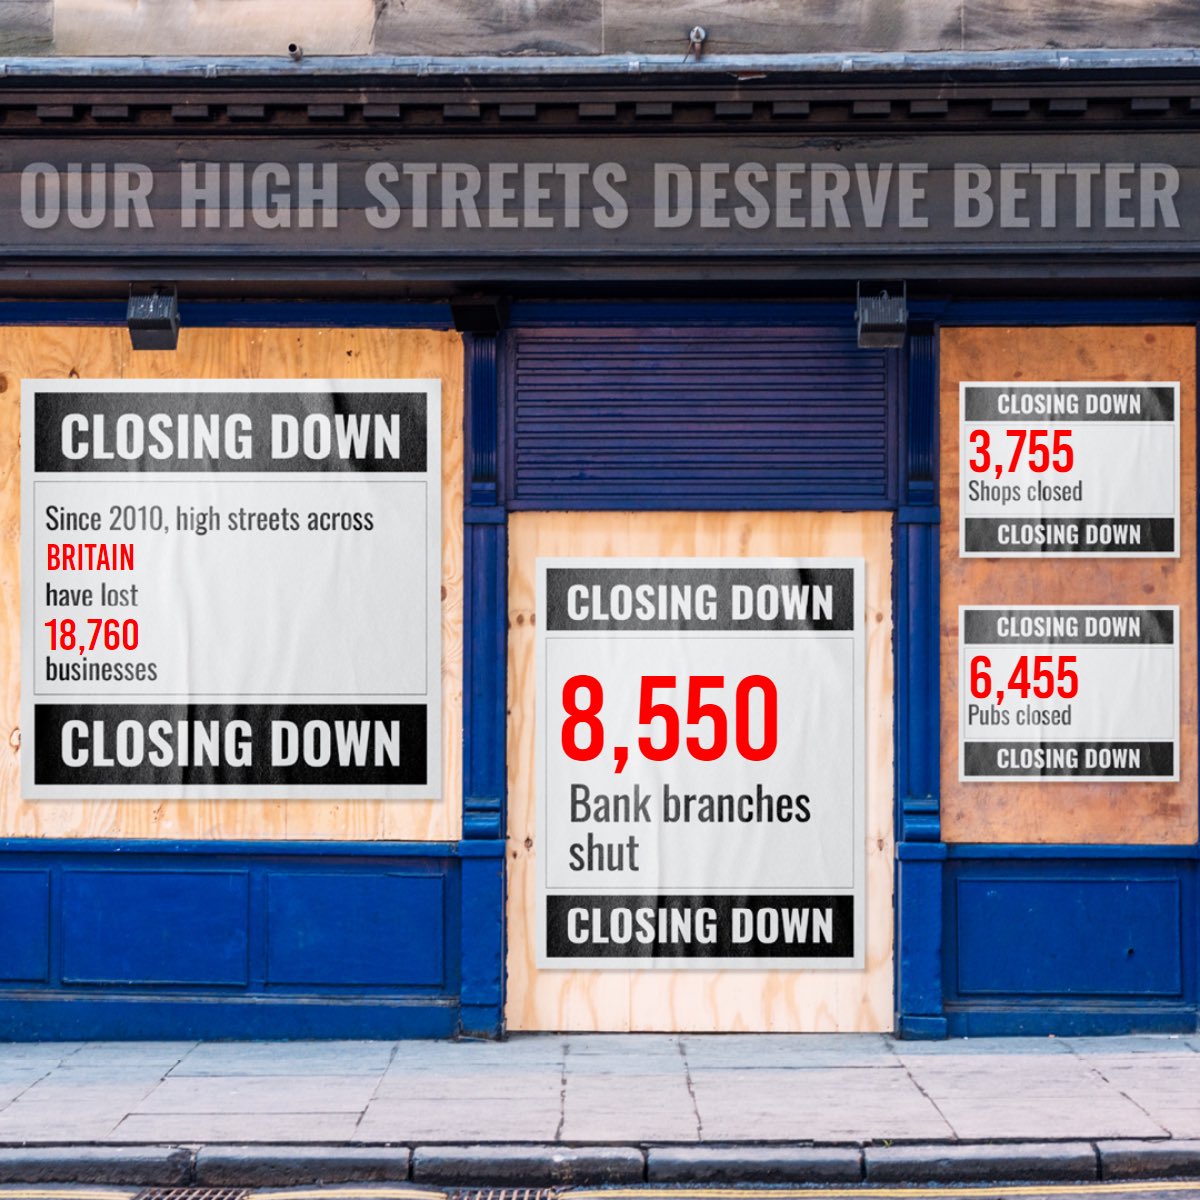 The NatWest in Streatham has been earmarked for closure this summer. It’s one of over 8,000 bank branches shut under the Tories since 2010, alongside thousands of other closed shops, pubs and services. Our high streets deserve better.